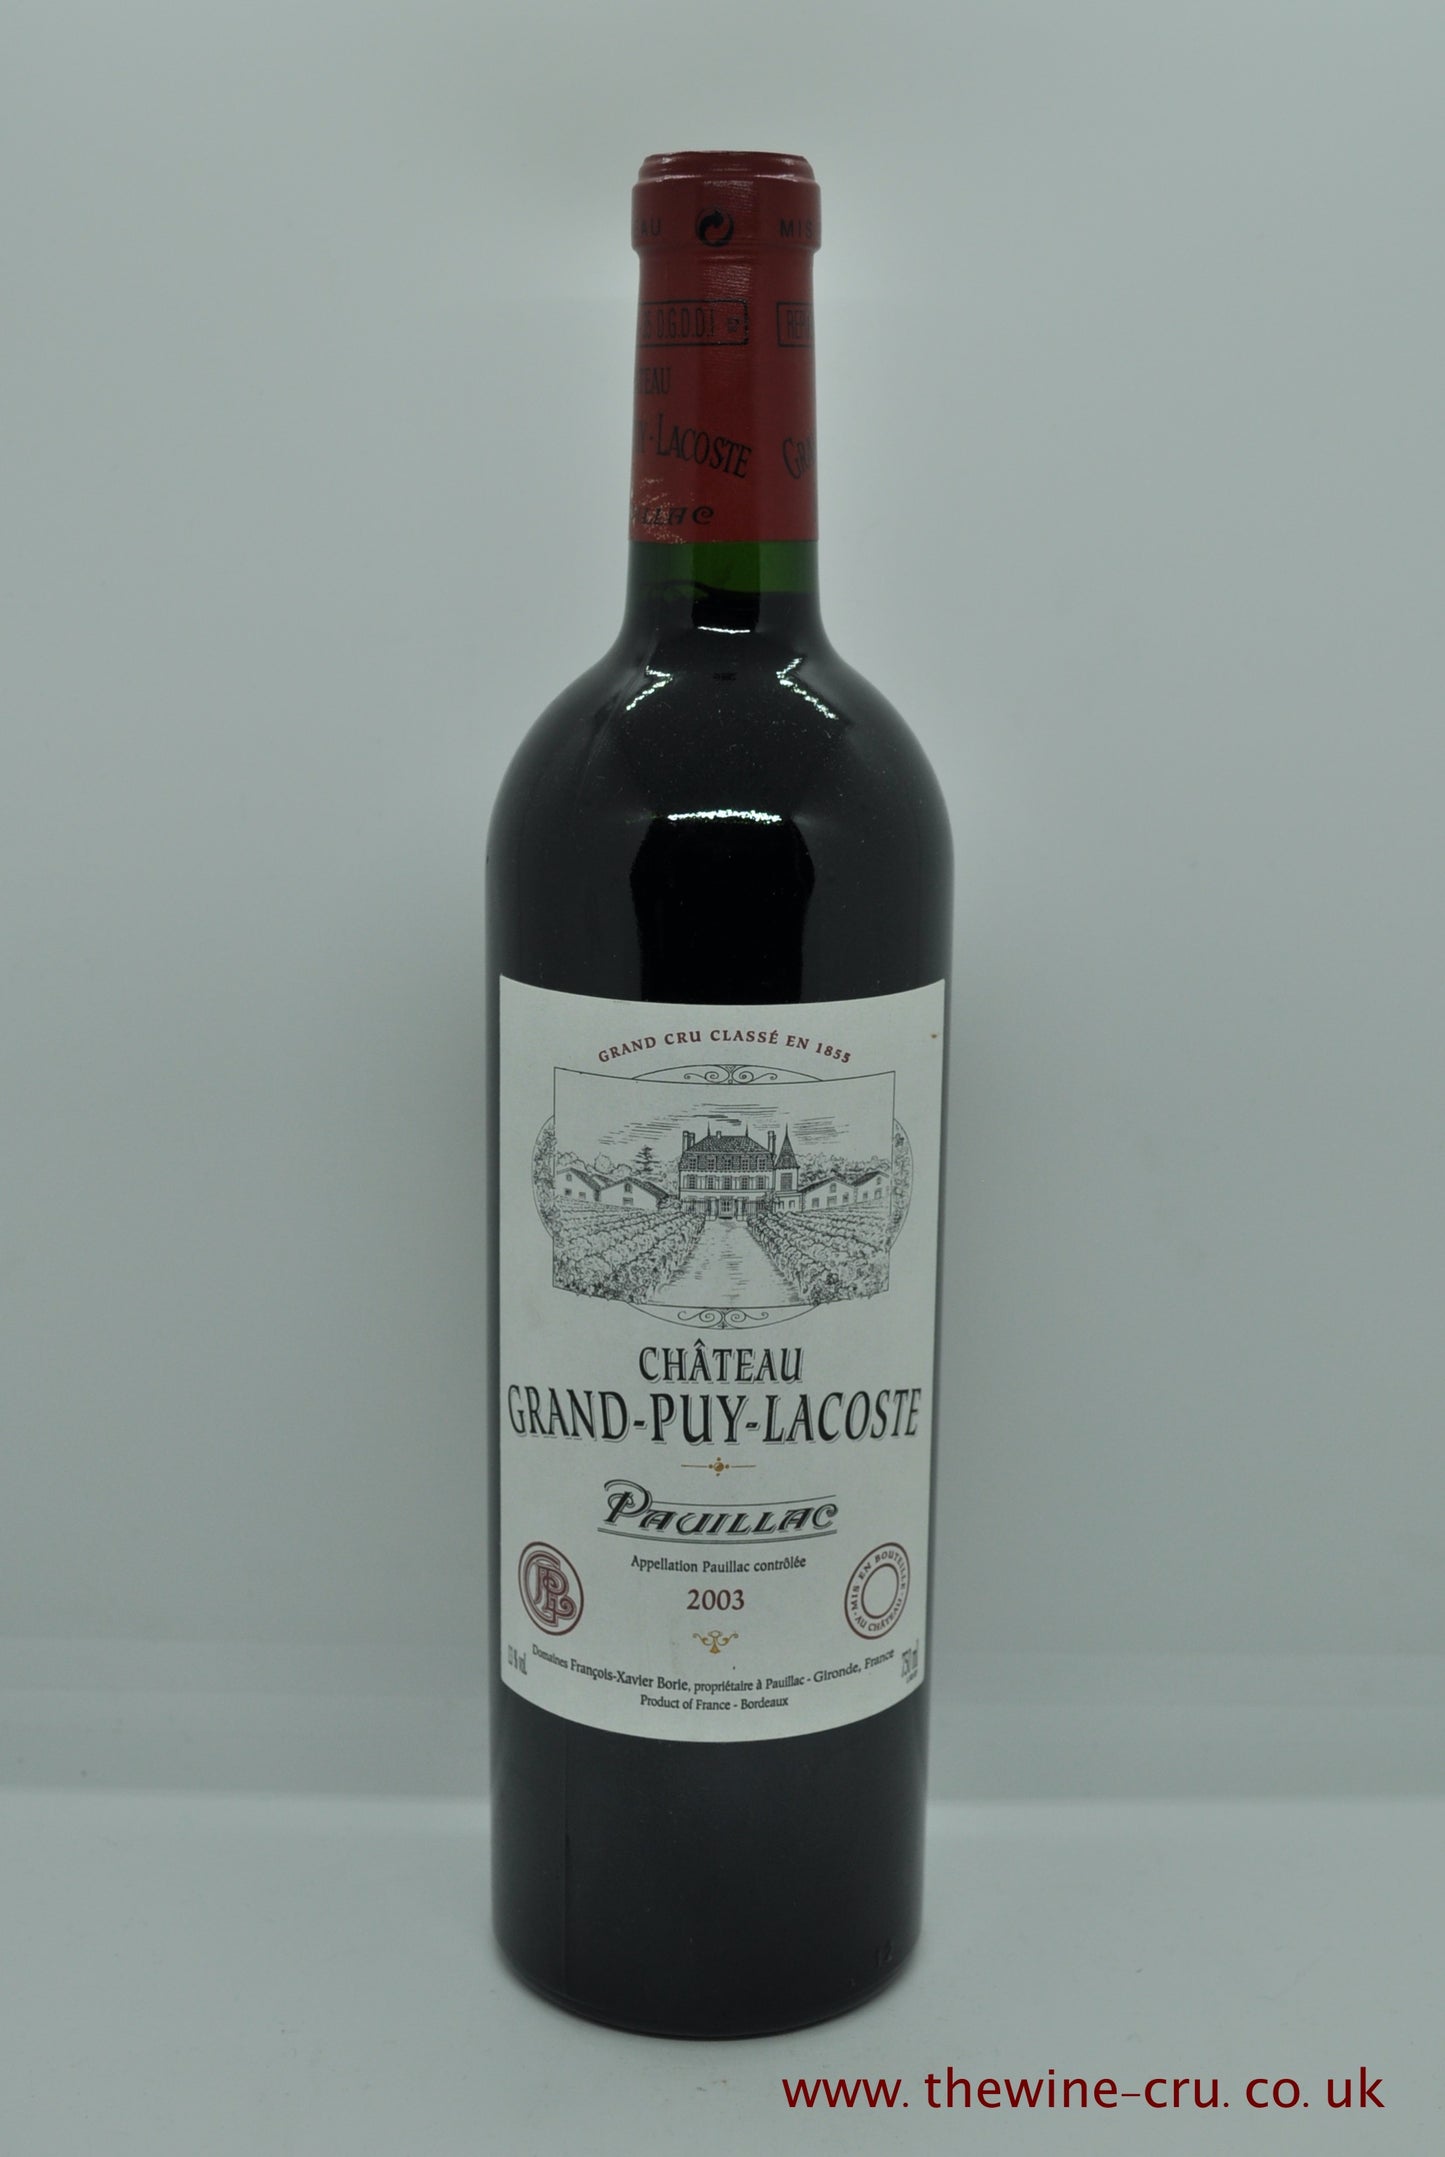 2003 vintage red wine. Chateau Grand Puy Lacoste 2003. France Bordeaux. Immediate delivery. Free local delivery. Gift wrapping available.